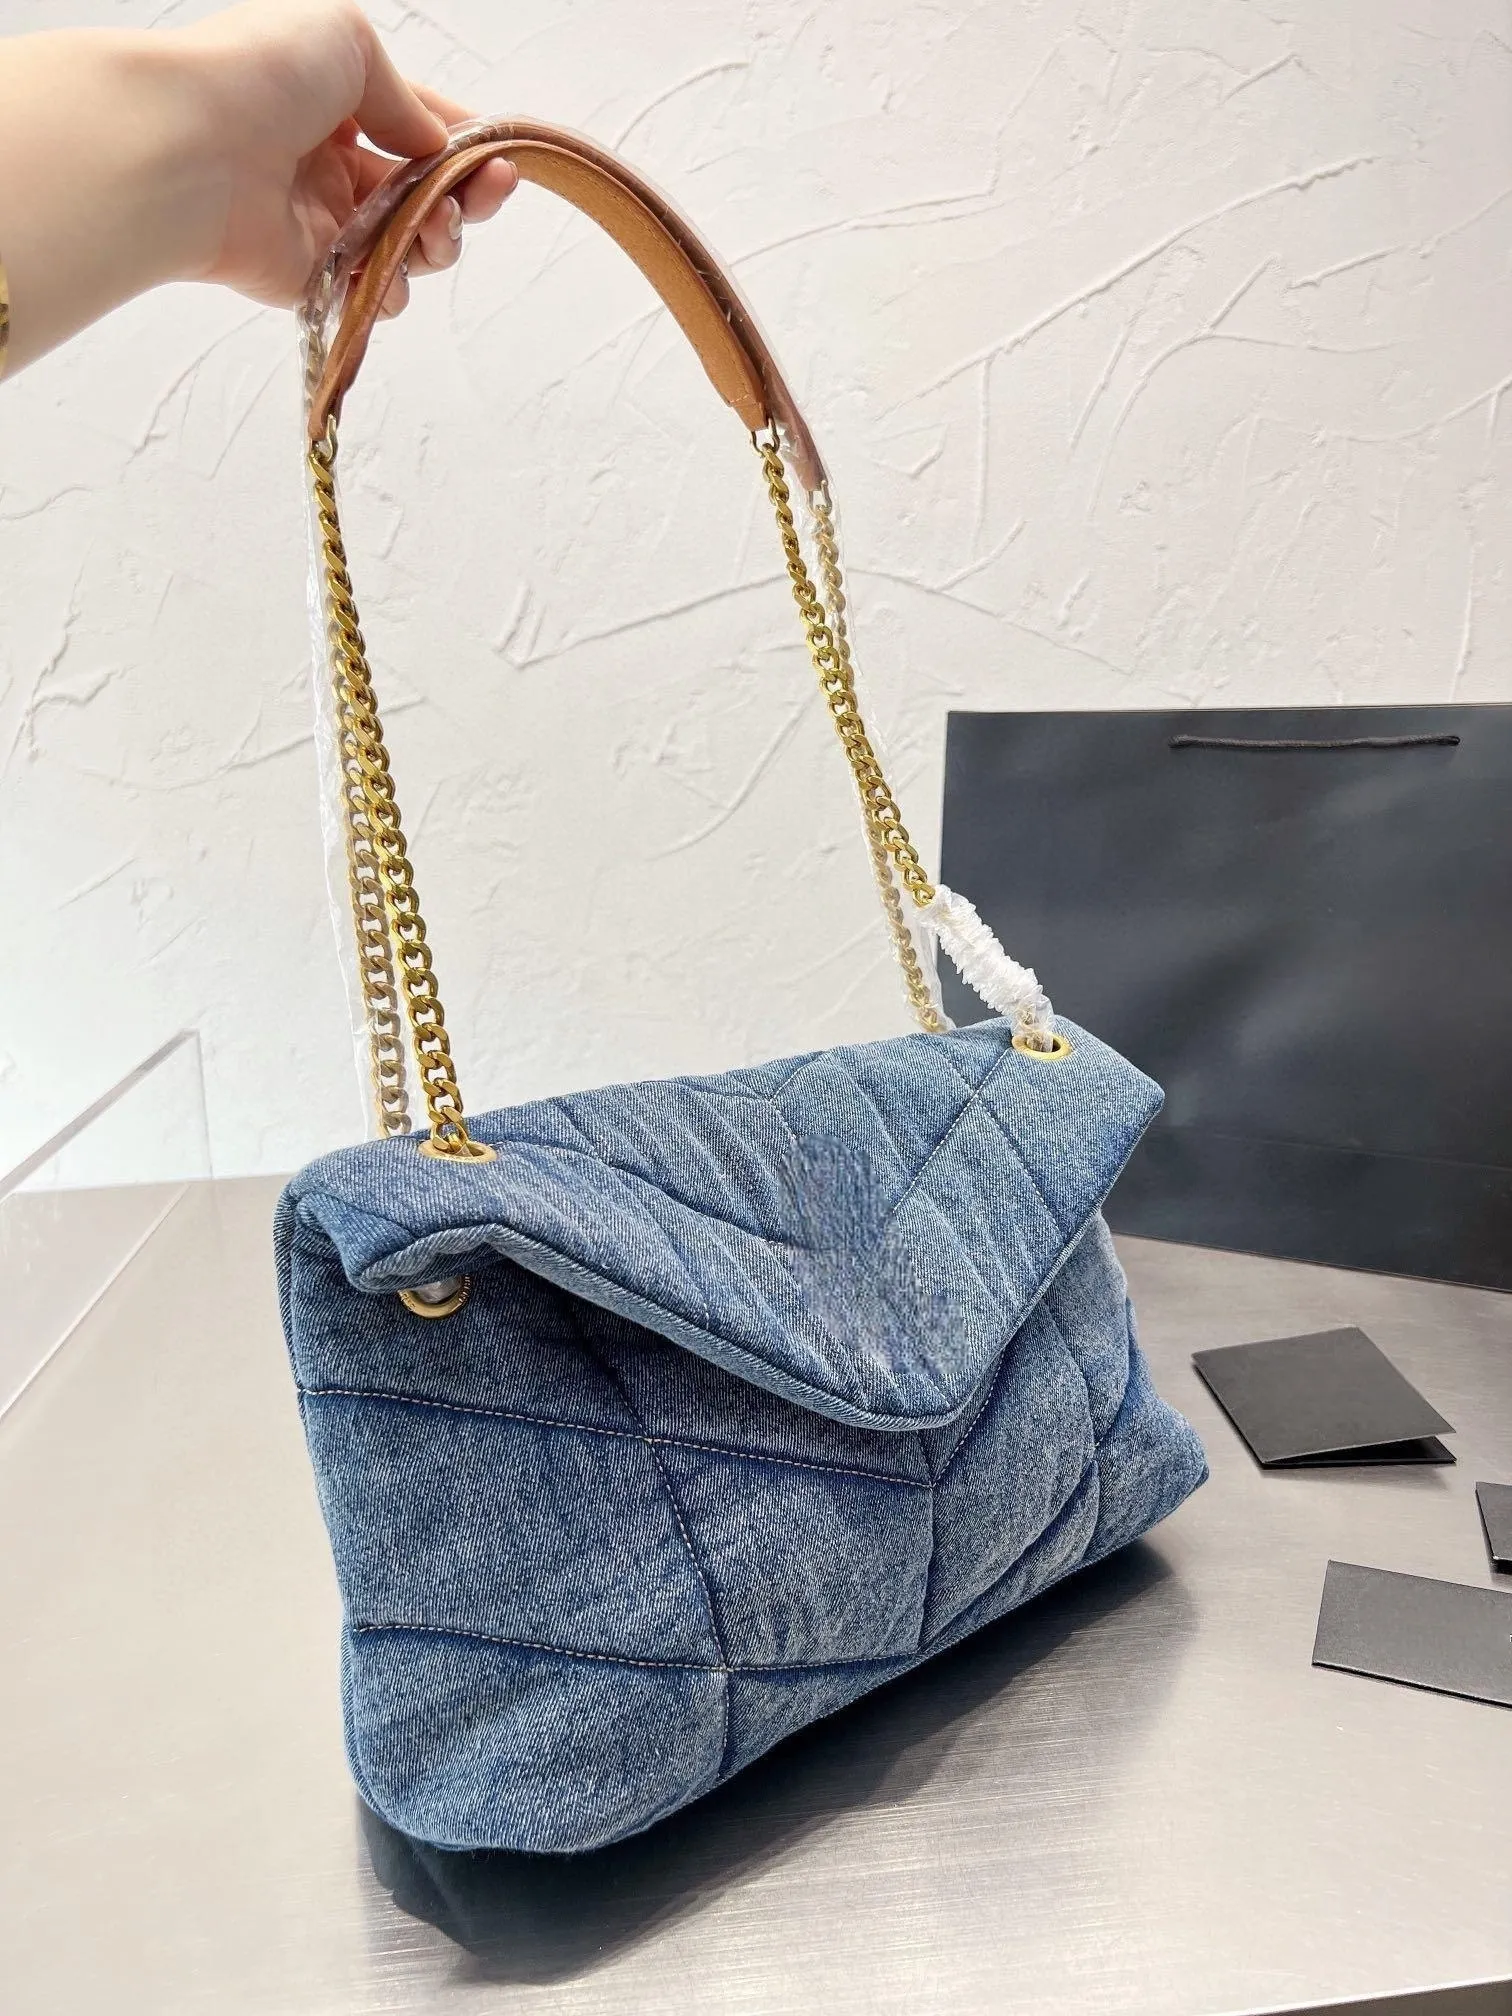 Washed denim bag, chubby appearance like holding cotton candy with high appearance value!